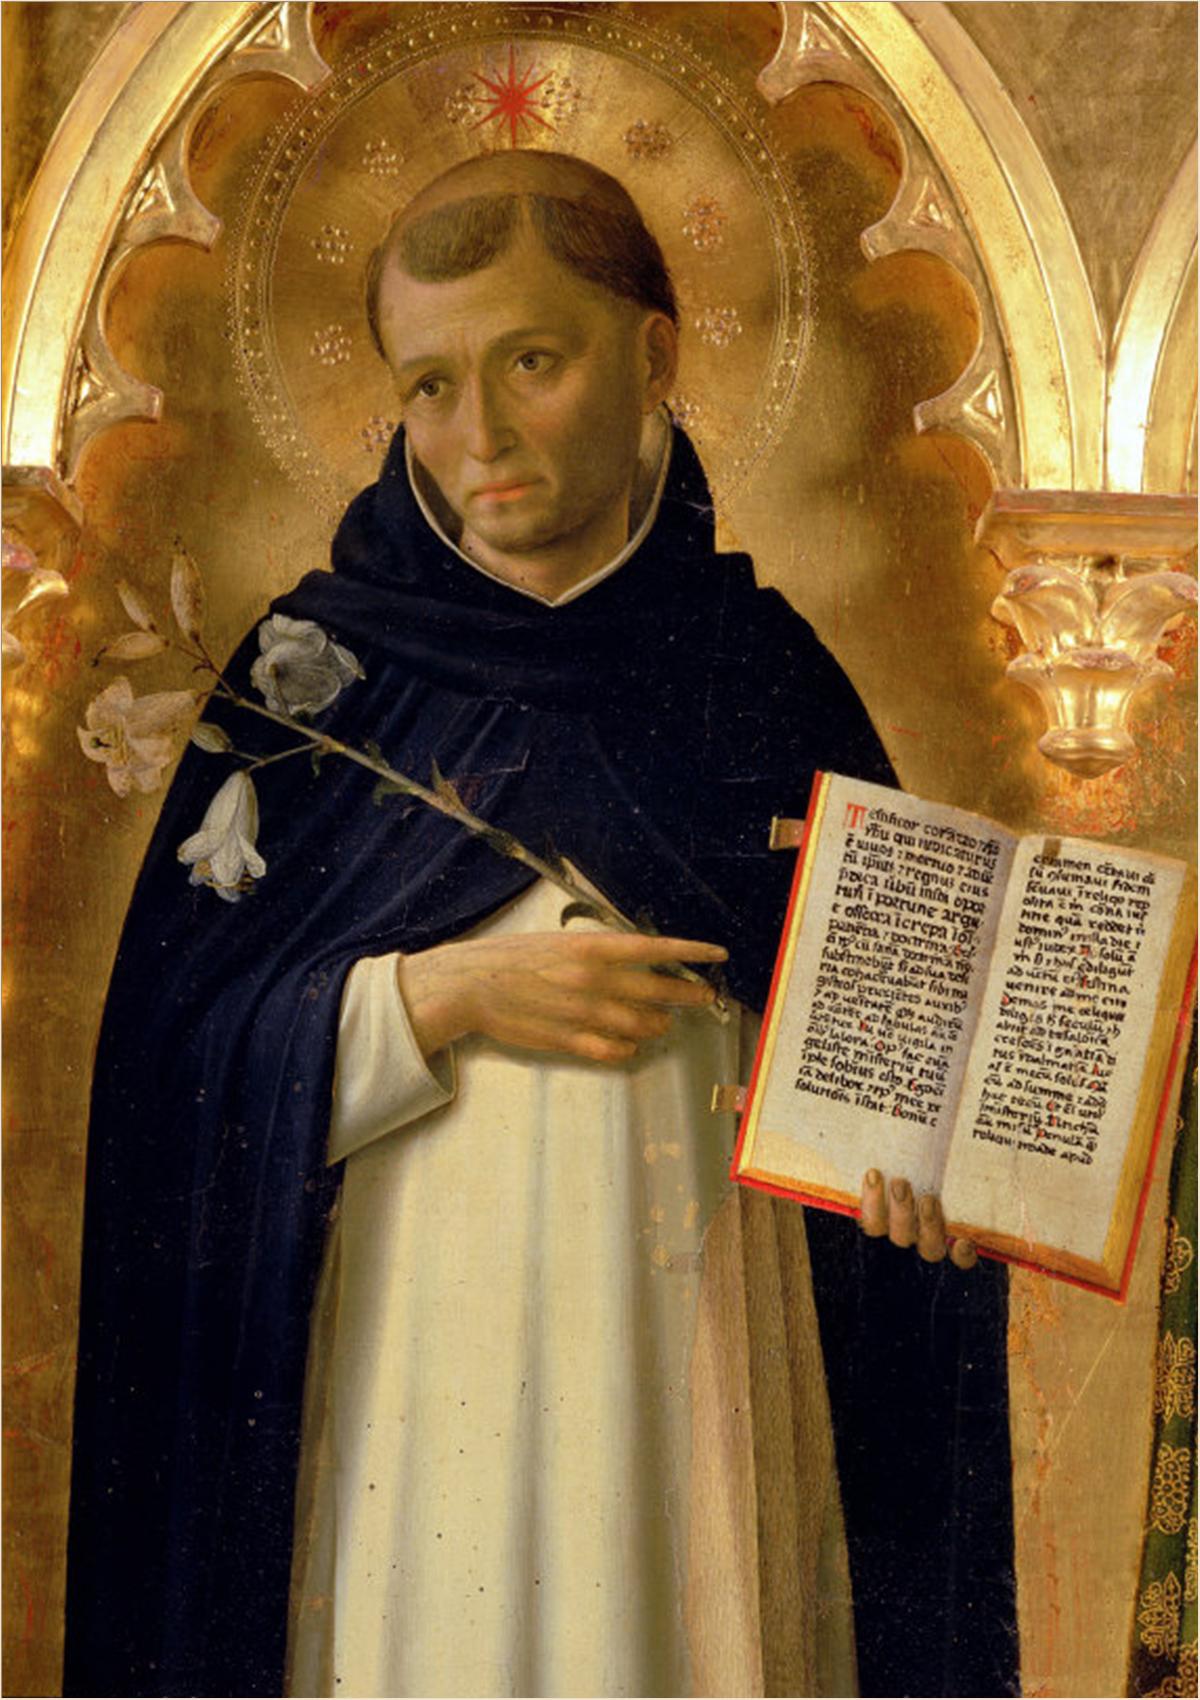 the_perugia_altarpiece_side_panel_depicting_st_dominic.jpg